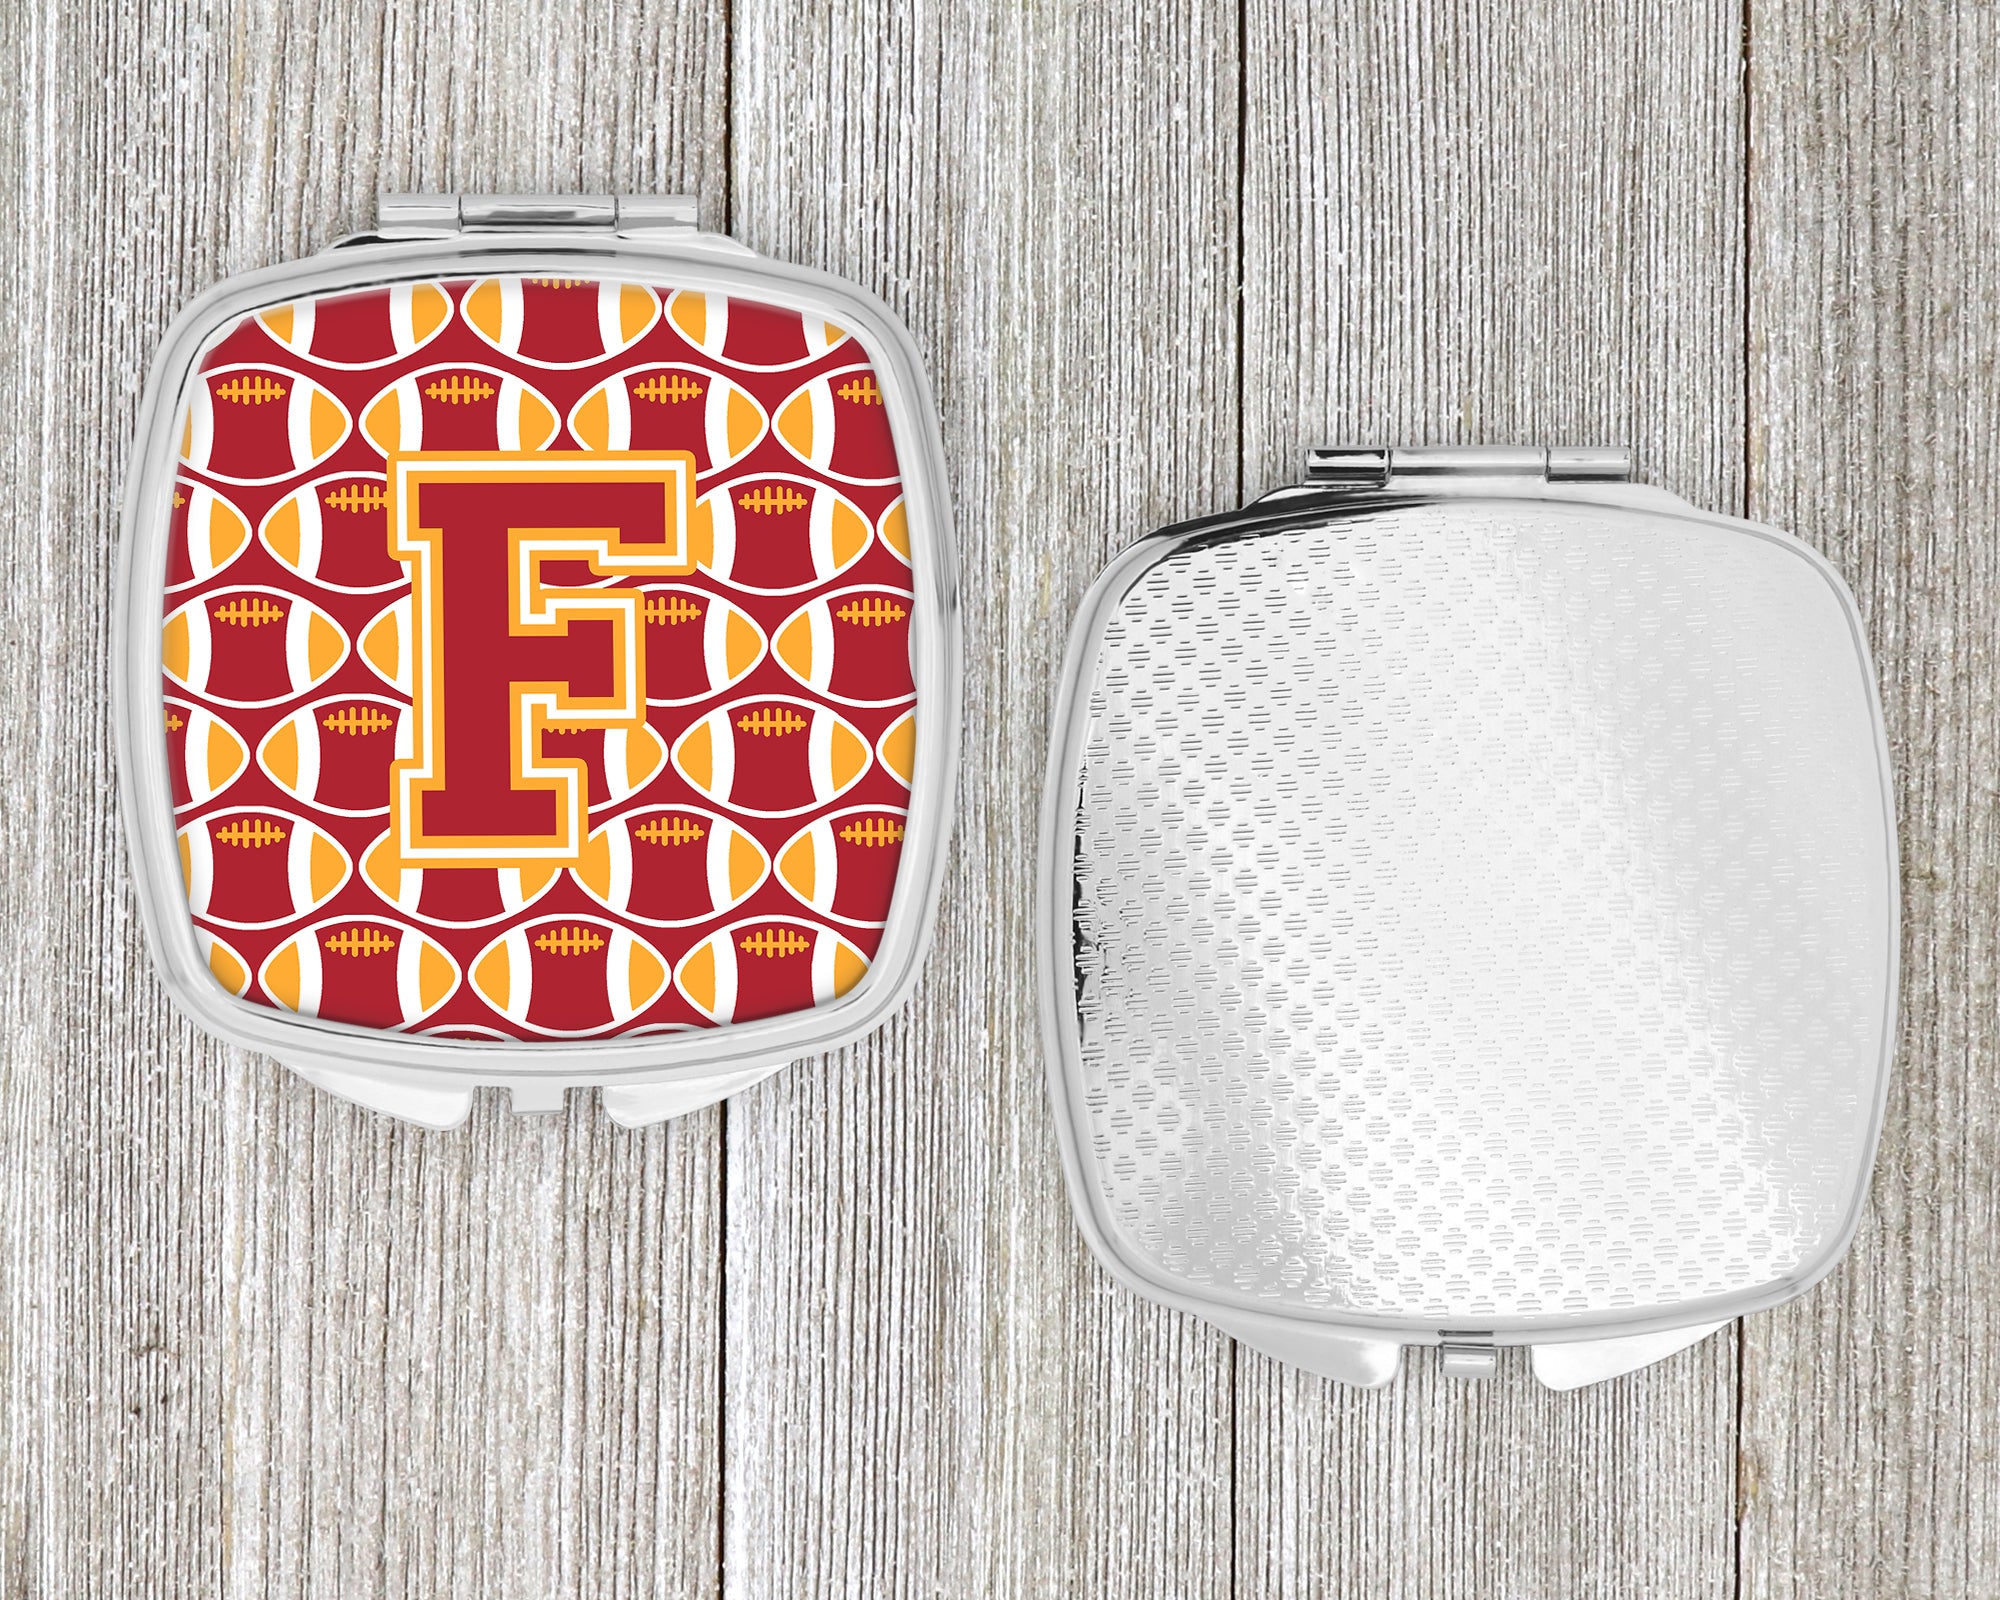 Letter F Football Cardinal and Gold Compact Mirror CJ1070-FSCM